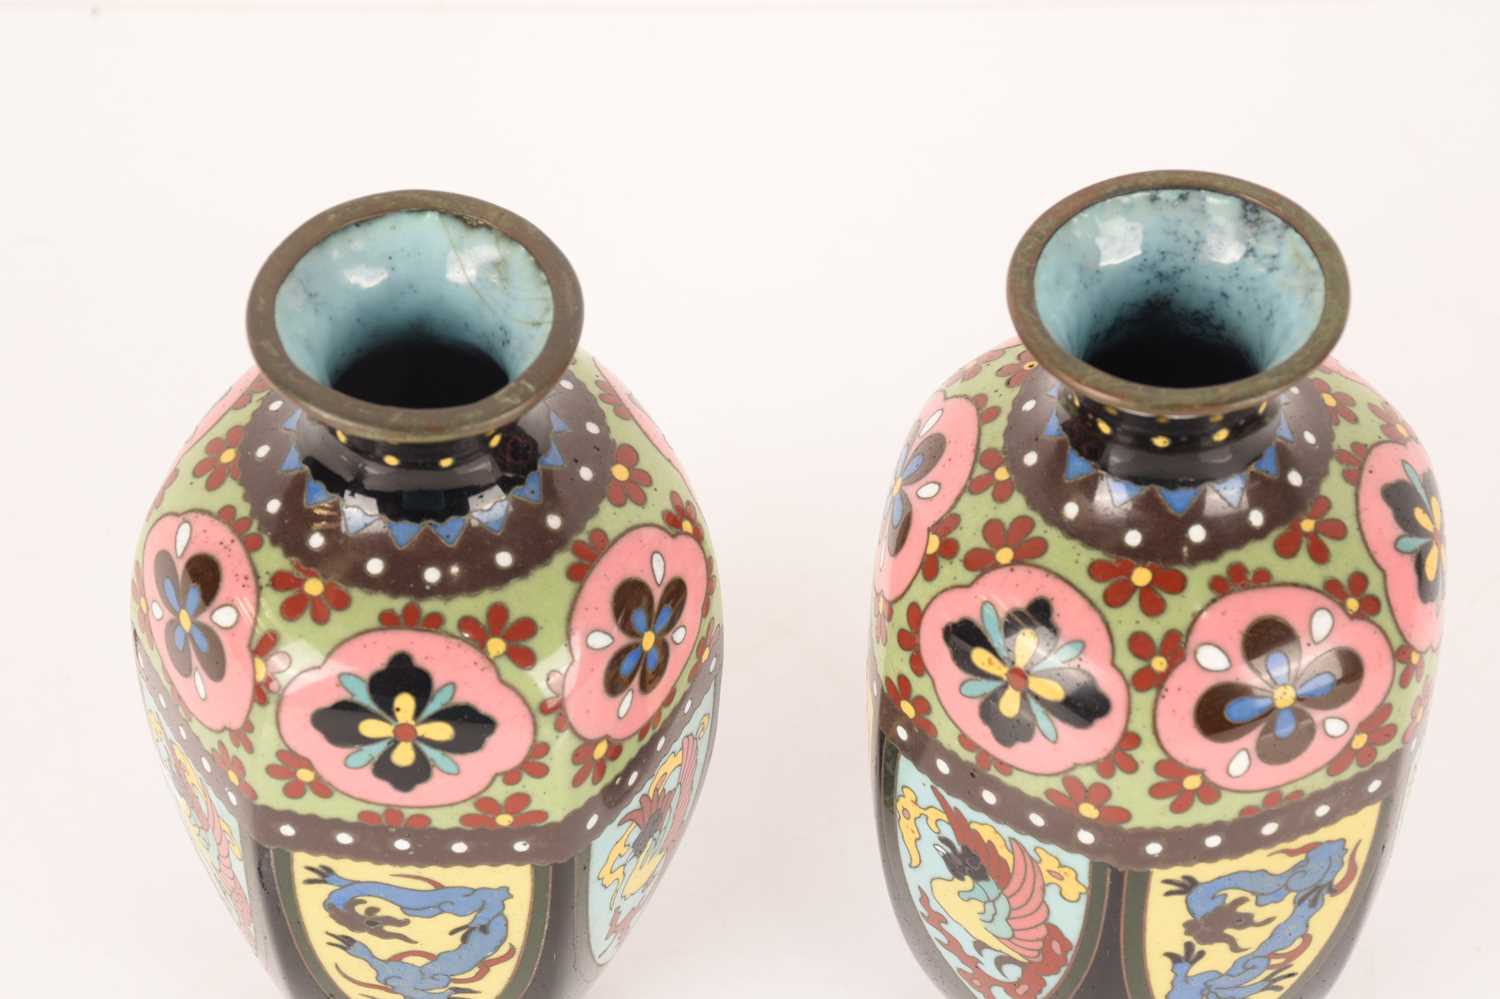 A 20th-century Chinese cloisonne and champleve enamel vase with polychrome enamel scrolls and foliag - Image 2 of 7